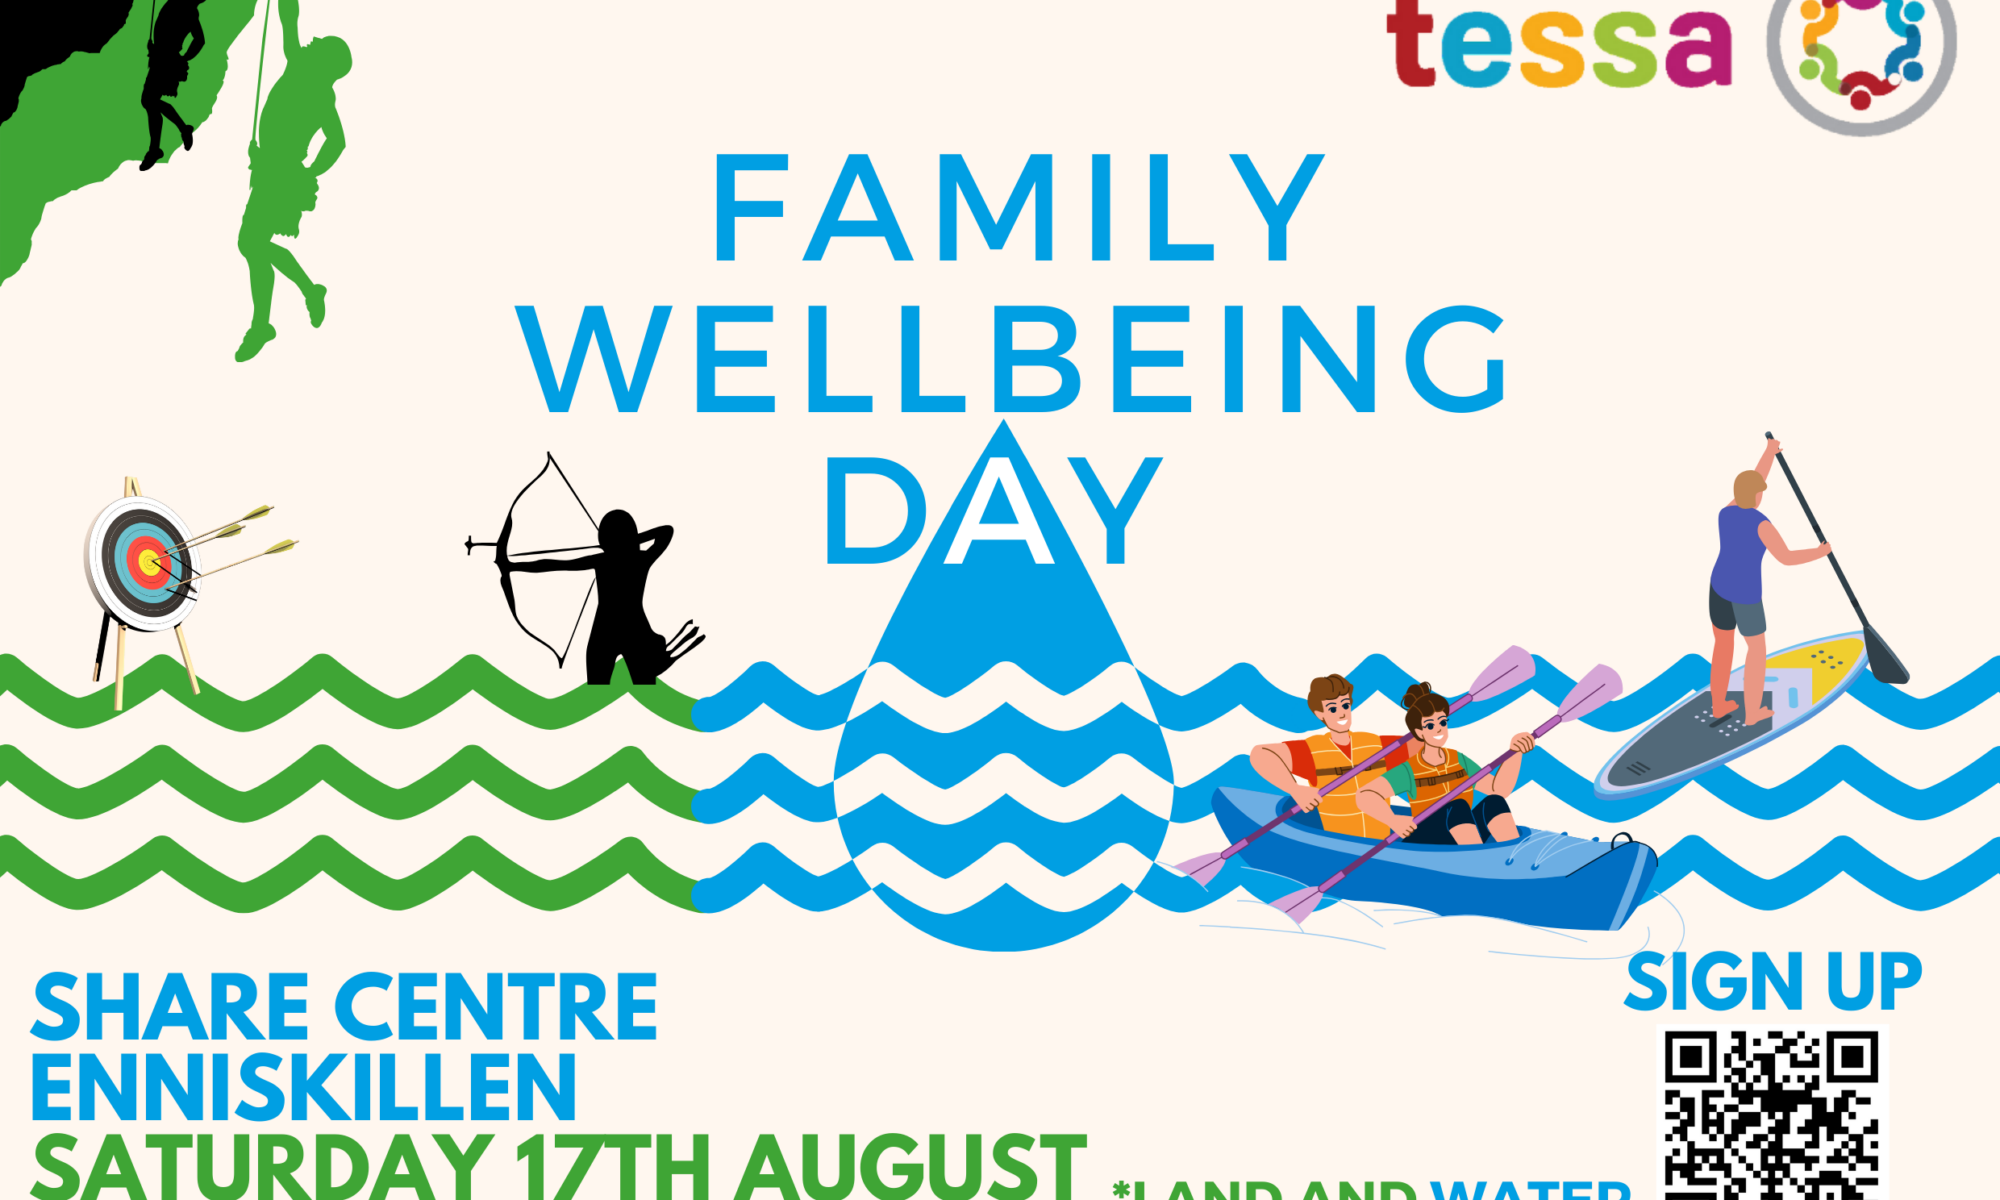 Family wellbeing day Share centre